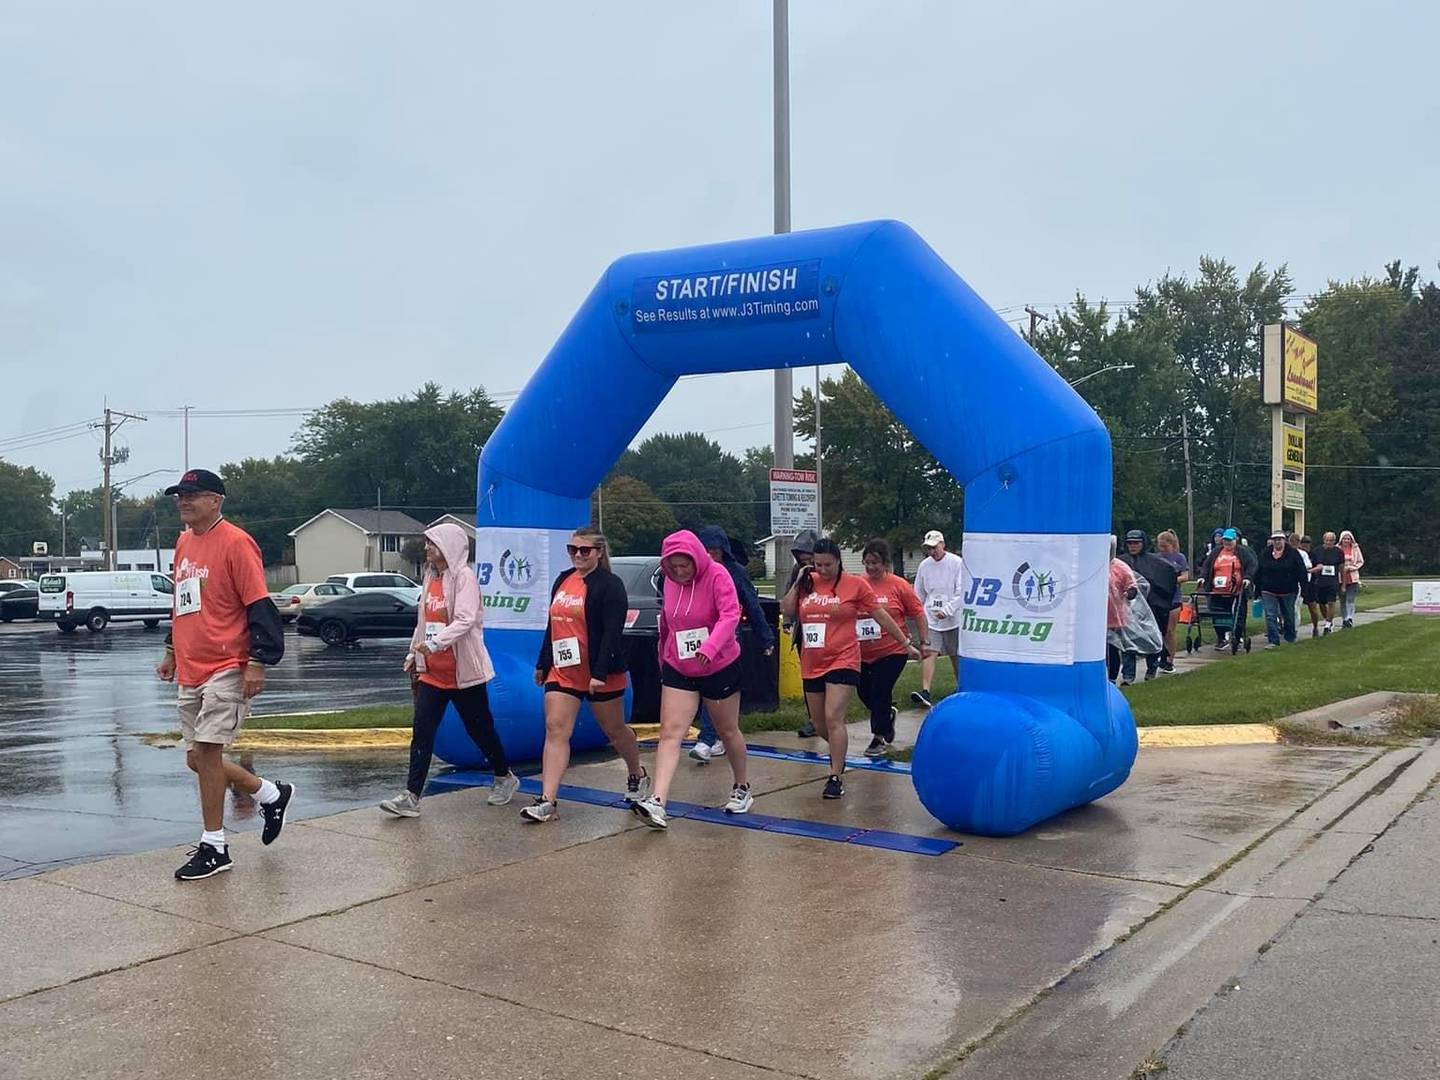 Lehan Drugs based in DeKalb will host their annual community outreach 5K fundraiser run/walk in partnership with Kishwaukee United Way beginning at 10 a.m. on Sept. 15, 2024, and all are invited.